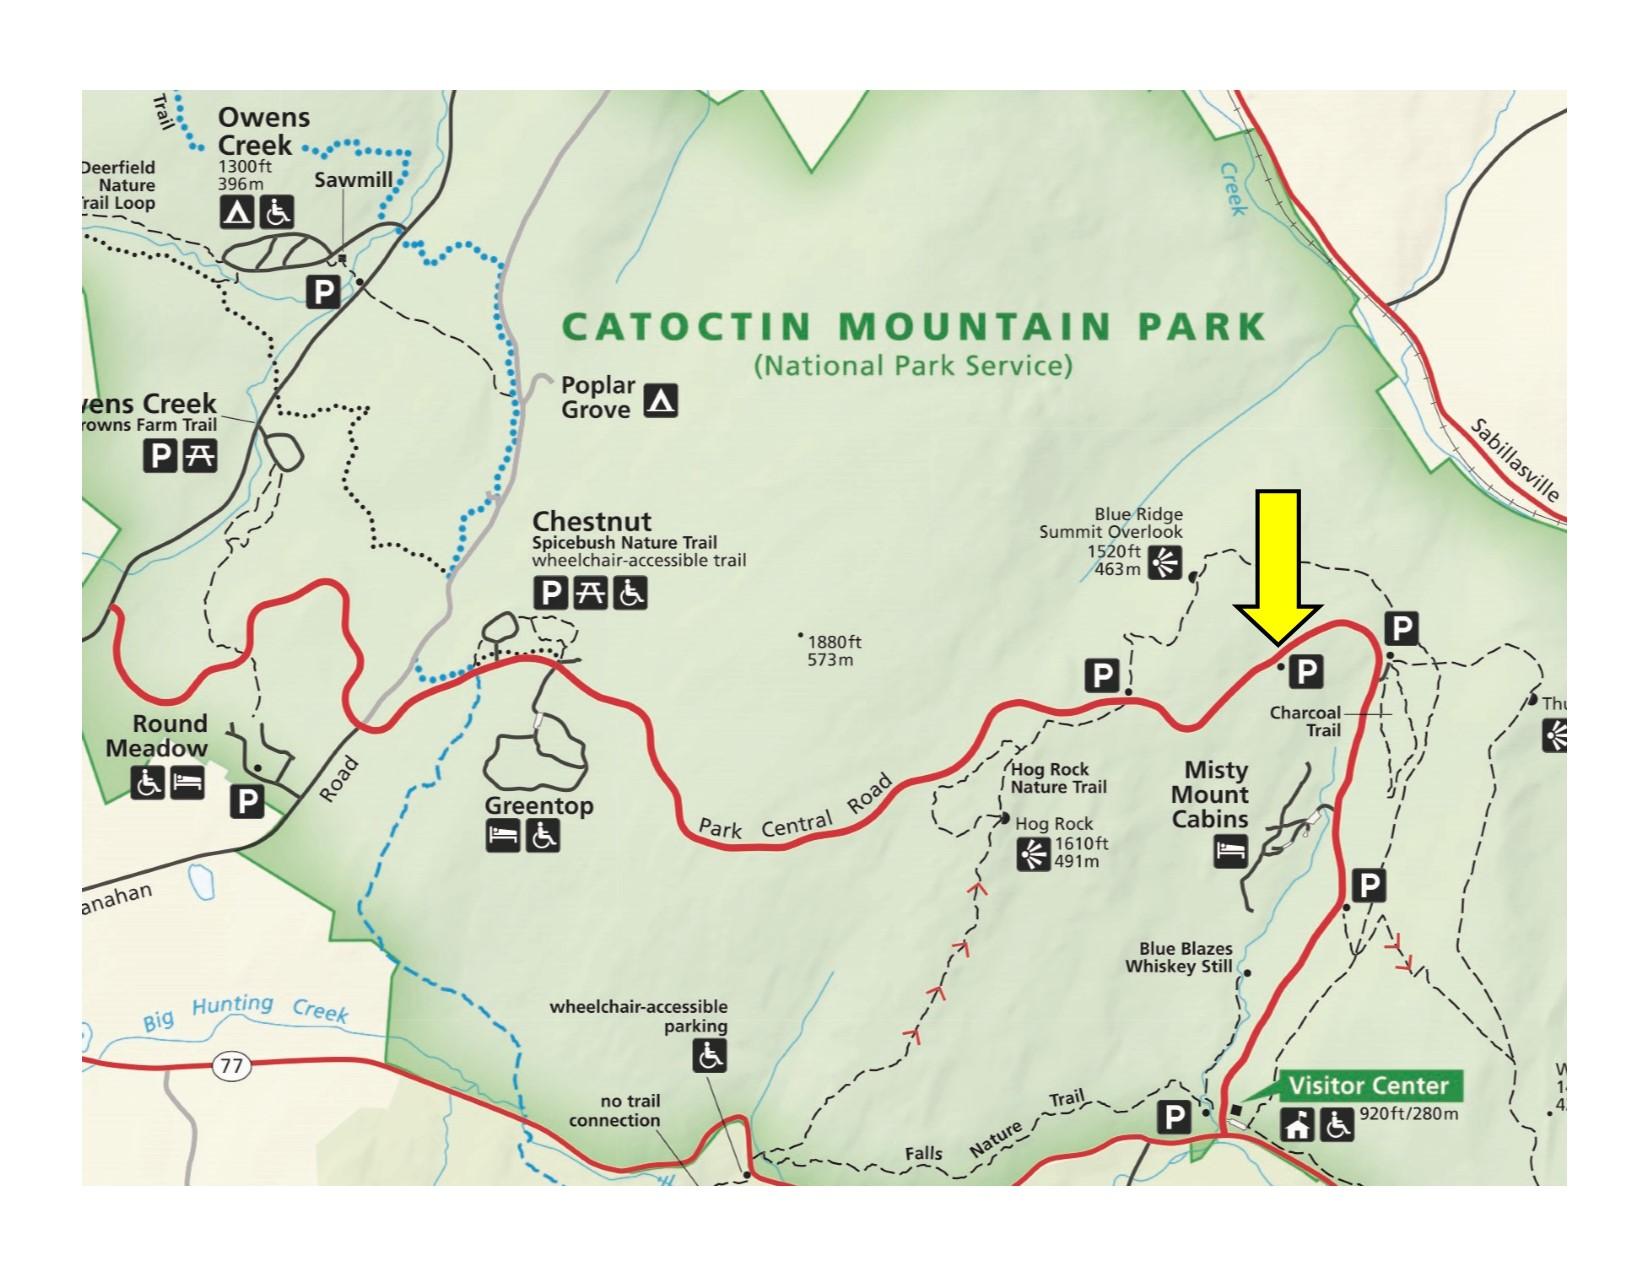 Park map with yellow arrow indicating location of parking area.